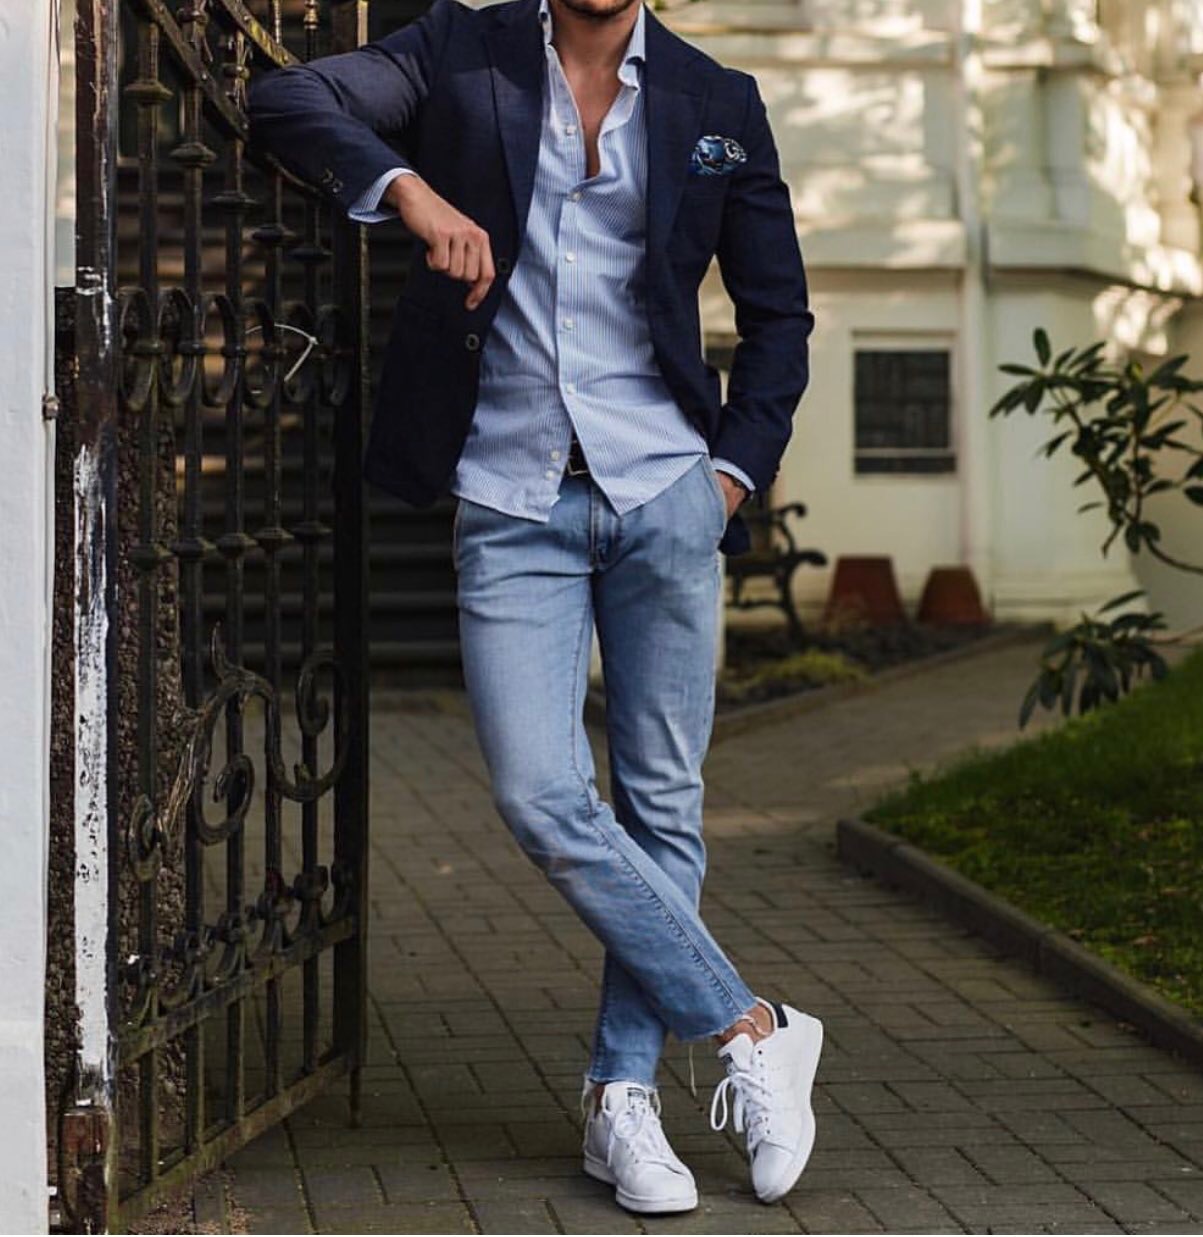 Man in stylish navy blue coat partnered with a light blue button-down shirt, jeans and sneakers